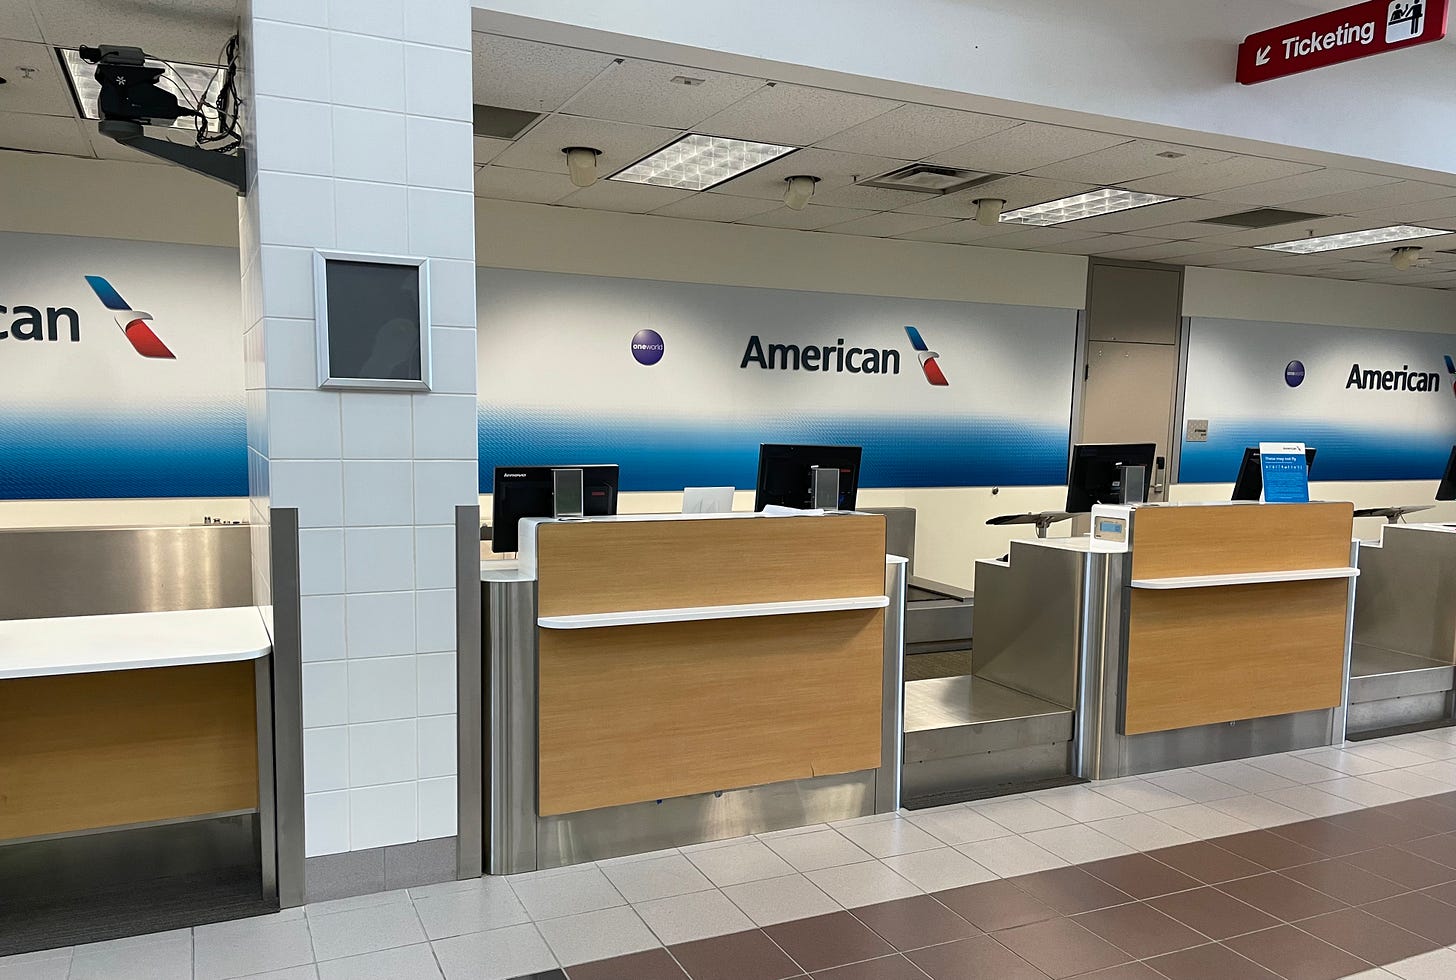 Check-in mock-up for training ground staff agents at the new American Airlines headquarters campus near DFW airport